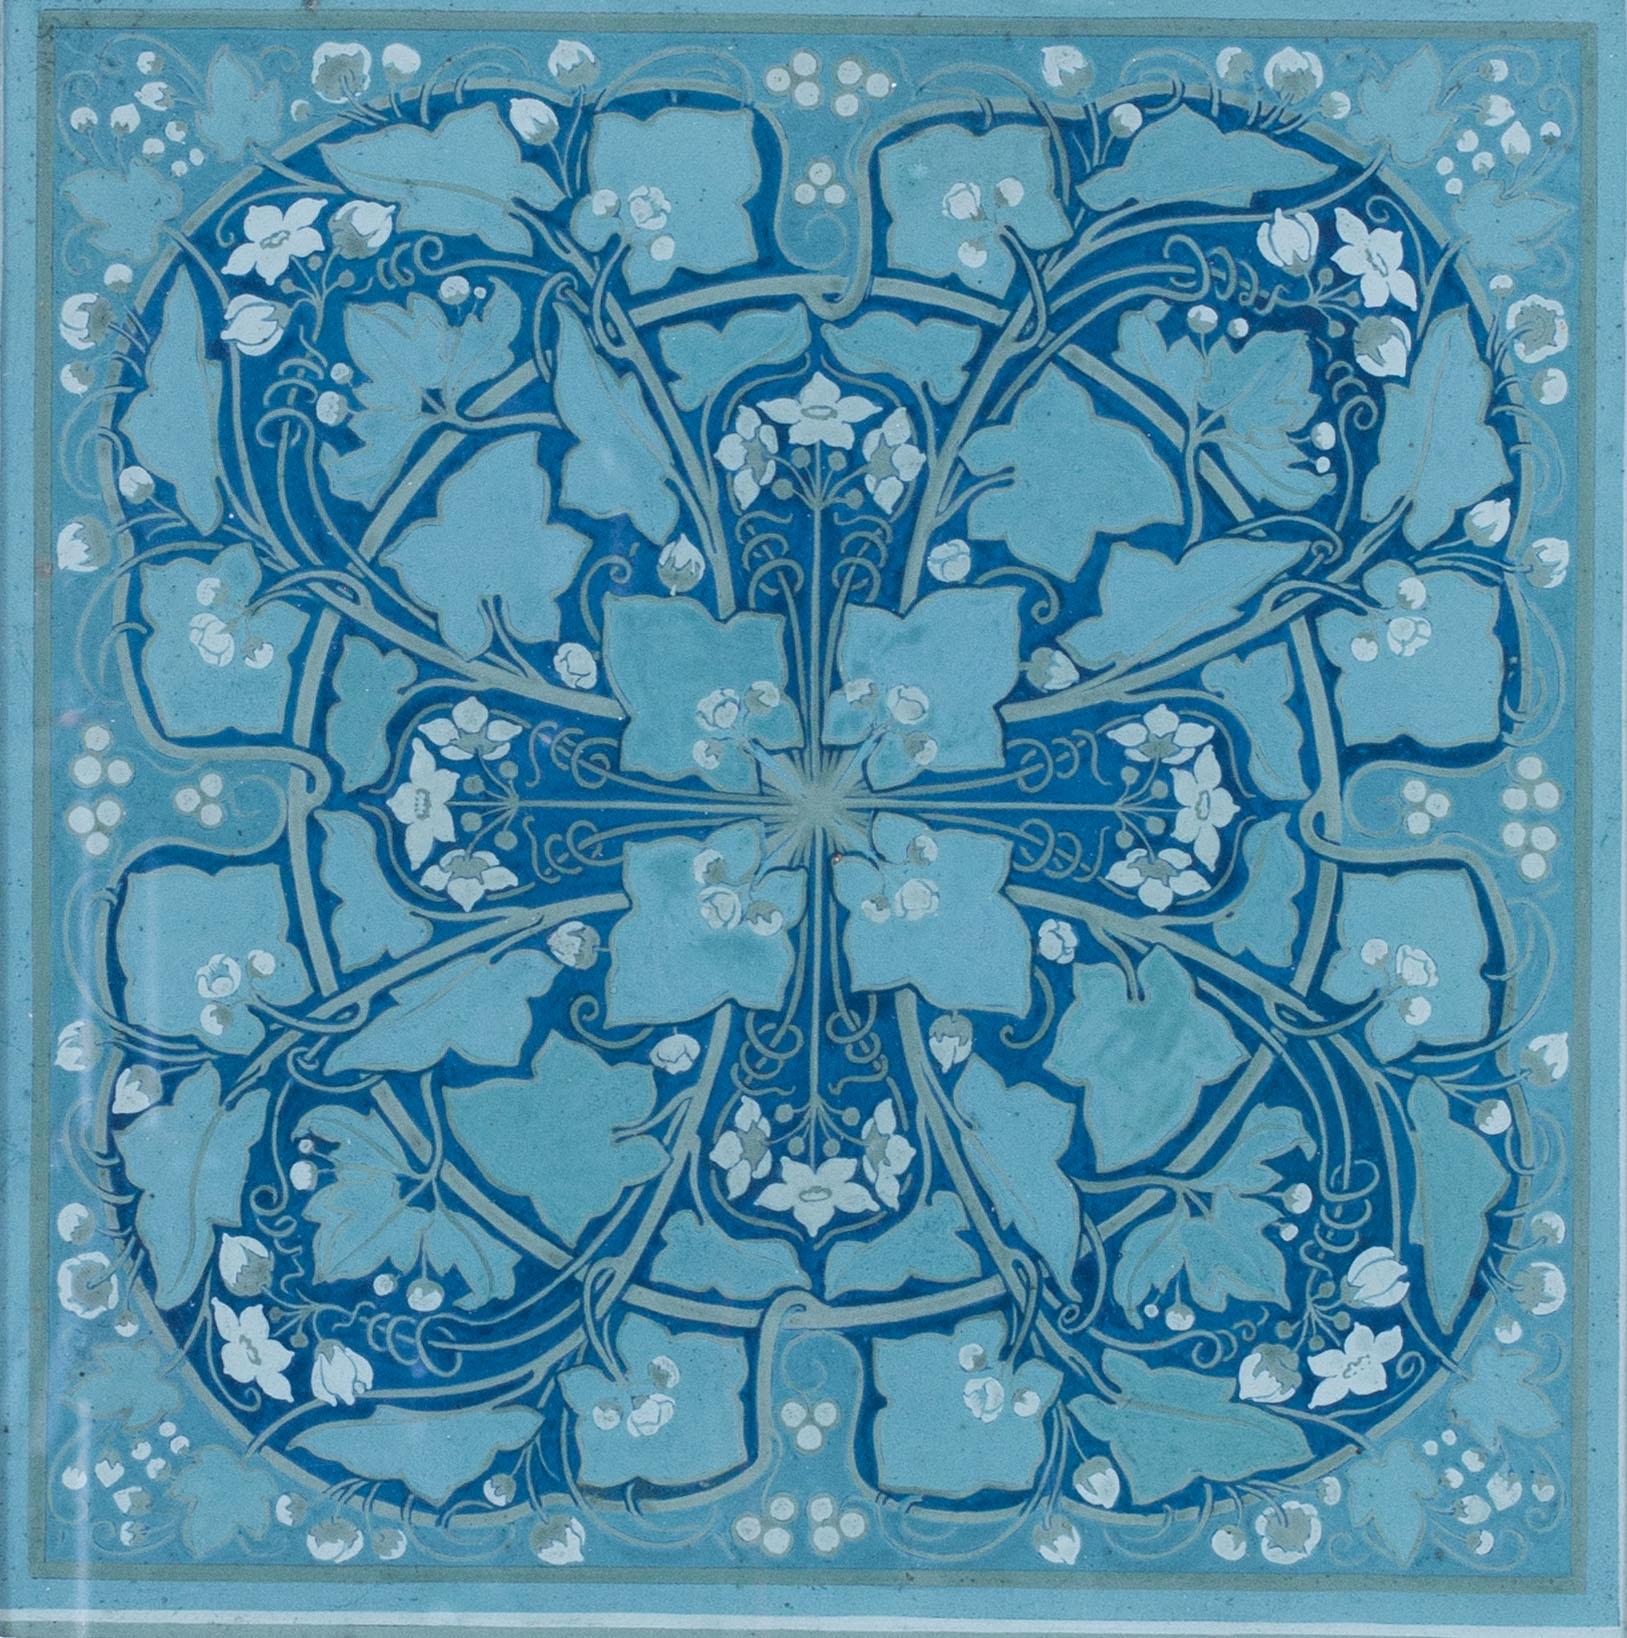 A squared design featuring ivy in blossom, blue green early 20th century British - Art by Edward Ridley